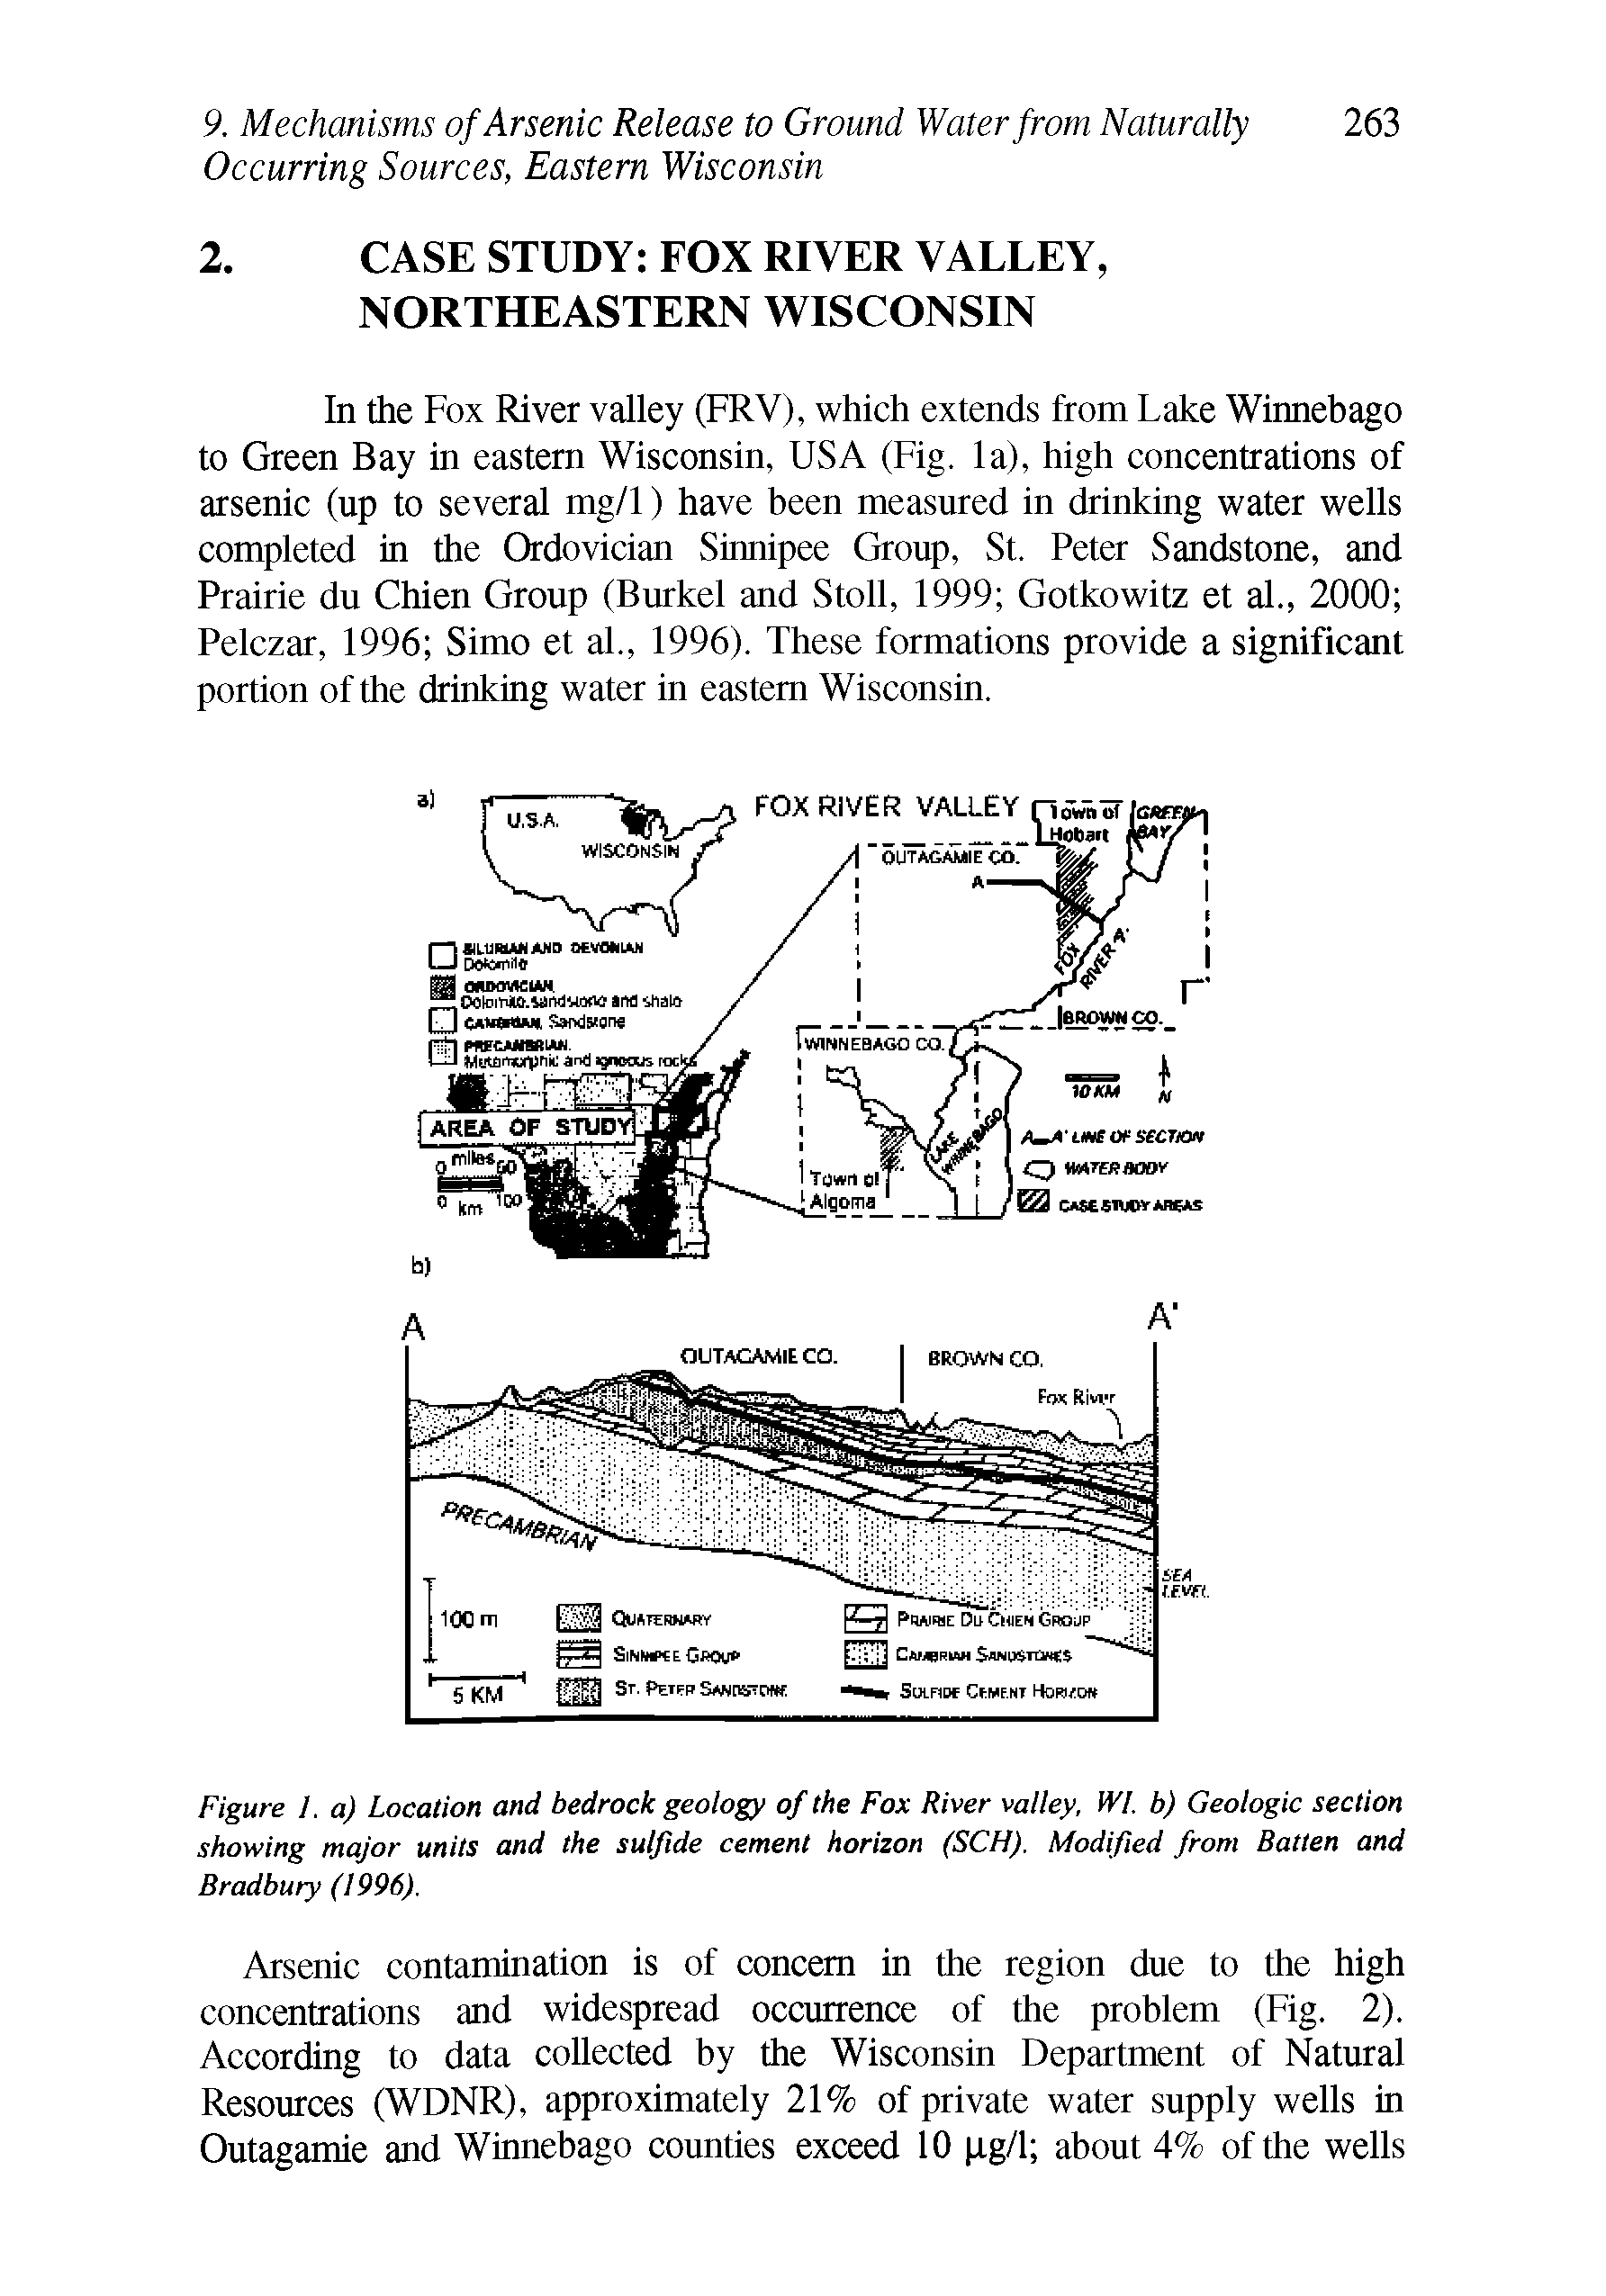 Figure I. a) Location and bedrock geology of the Fox River valley, WI. b) Geologic section showing major units and the sulfide cement horizon (SCH). Modified from Batten and Bradbury (1996).